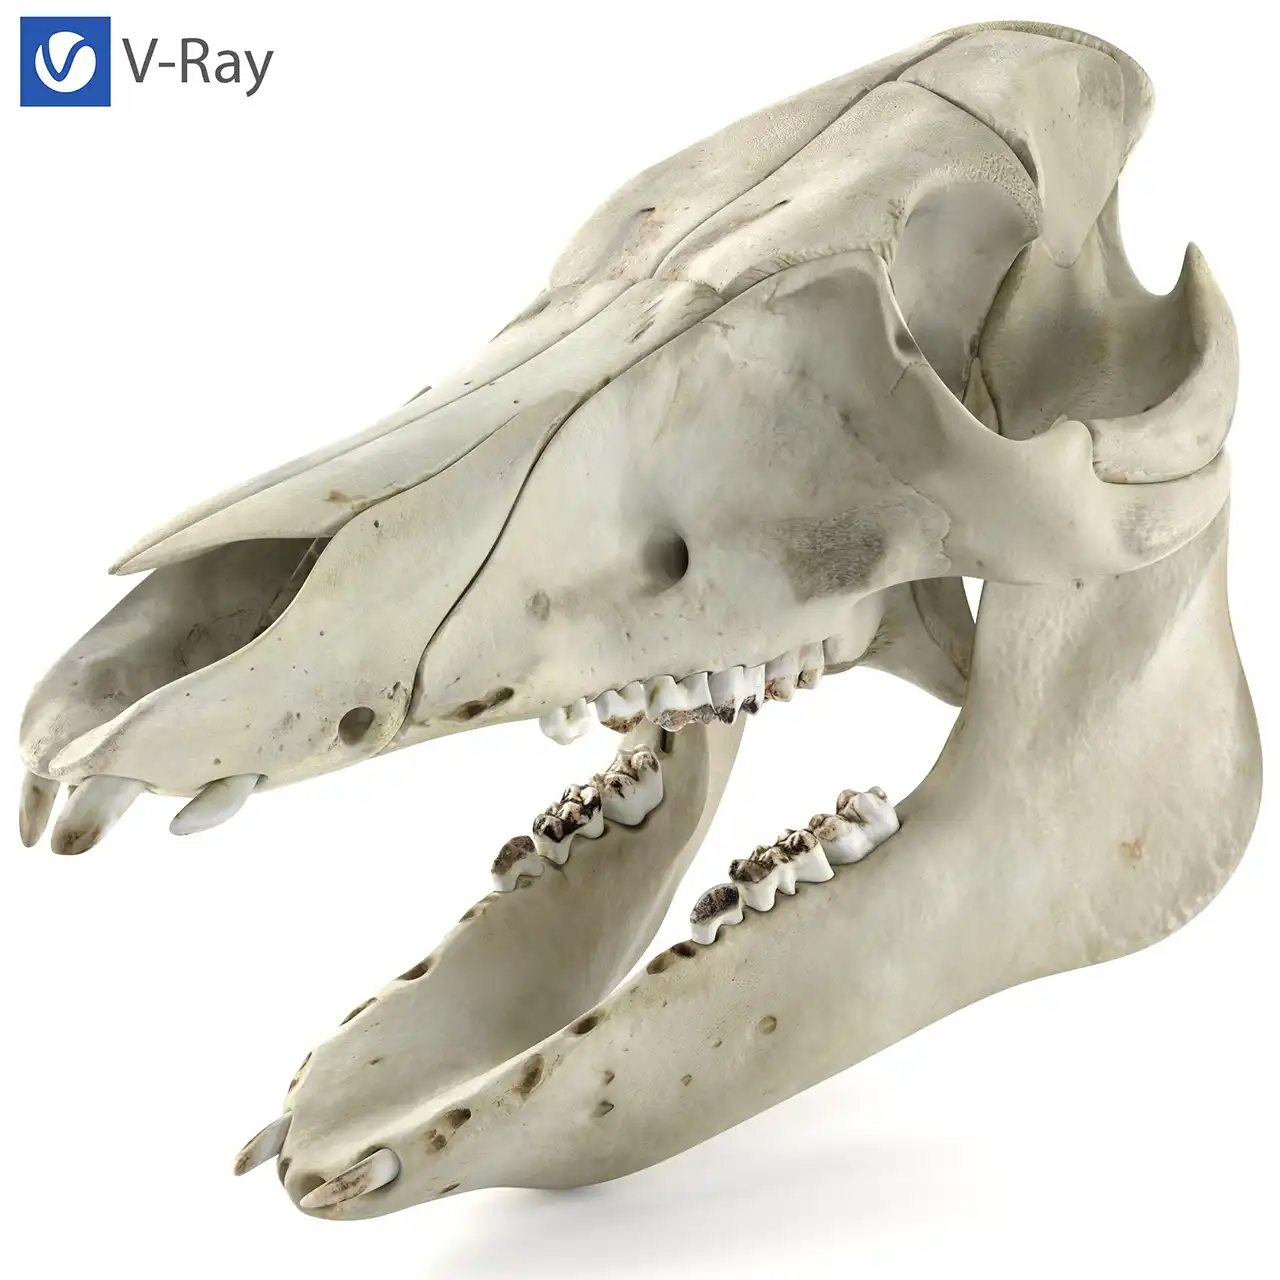 V-Ray renderer photorealistic result tested on pig skull 3d model in 3ds Max.